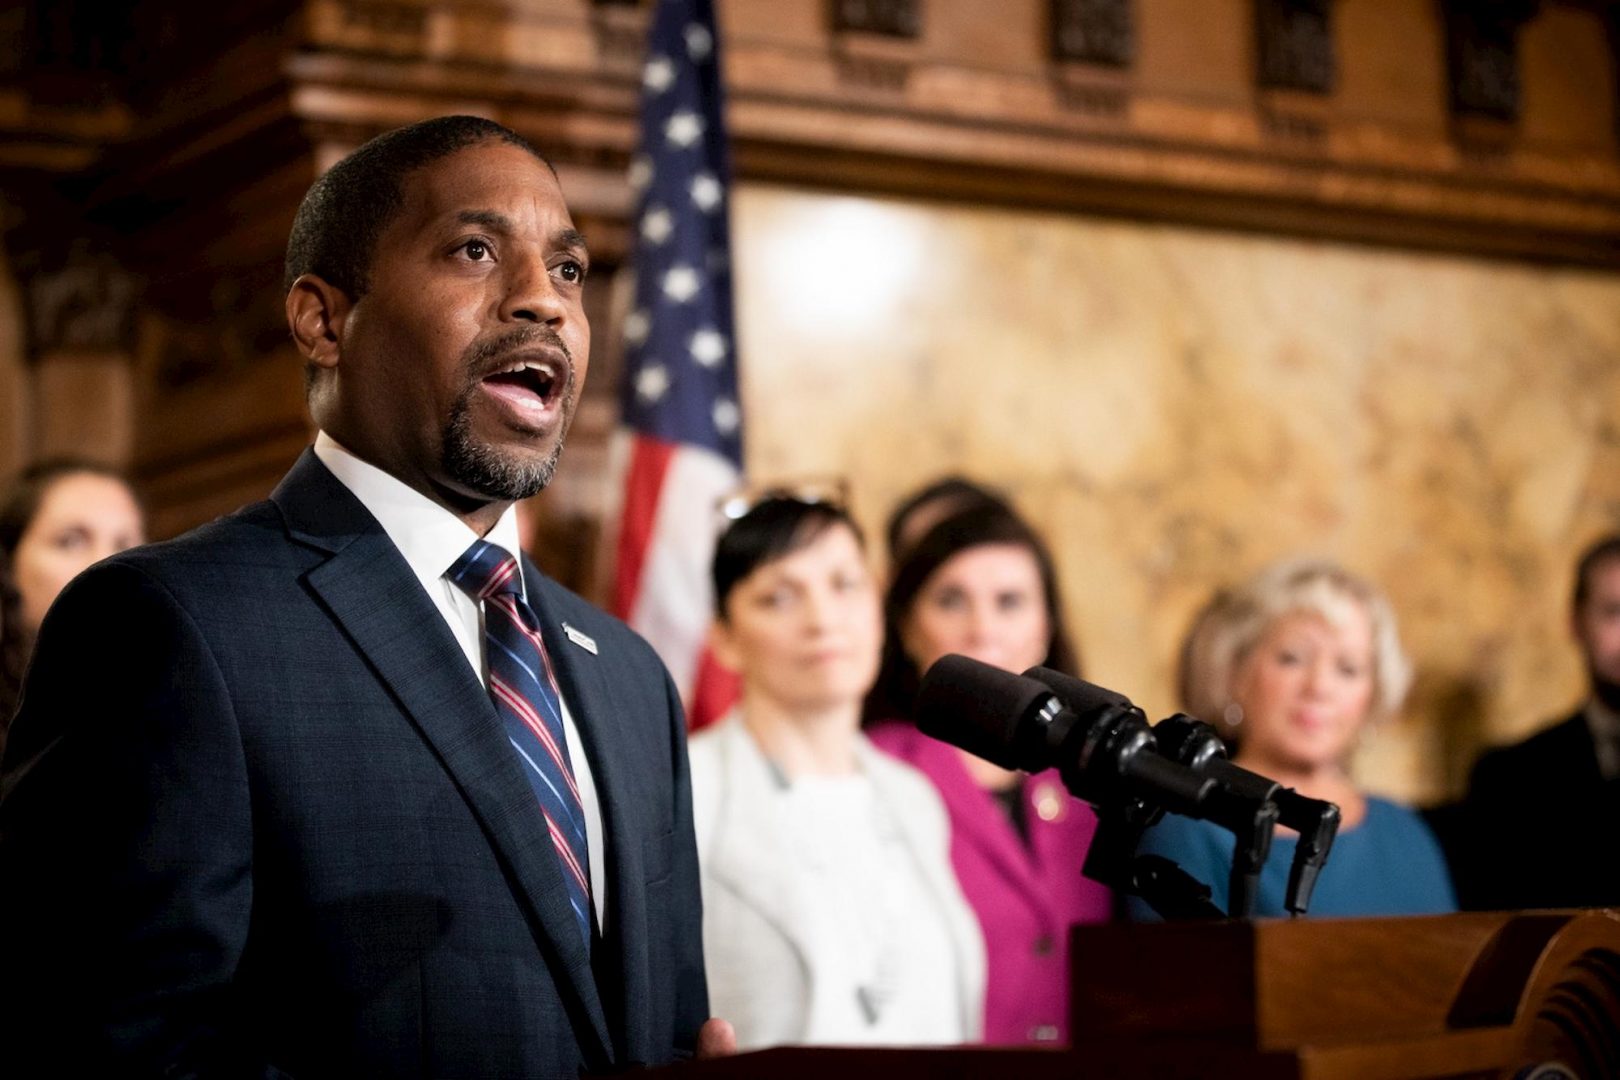 Micah Sims, executive director of Common Cause Pennsylvania, speaks at the Capitol during the signing of an election reform bill on Oct. 31, 2019. The group, which helped champion the state's 2006 lobbying law, was fined $19,900 for breaking it. Sims attributed the failure to technical difficulties. (